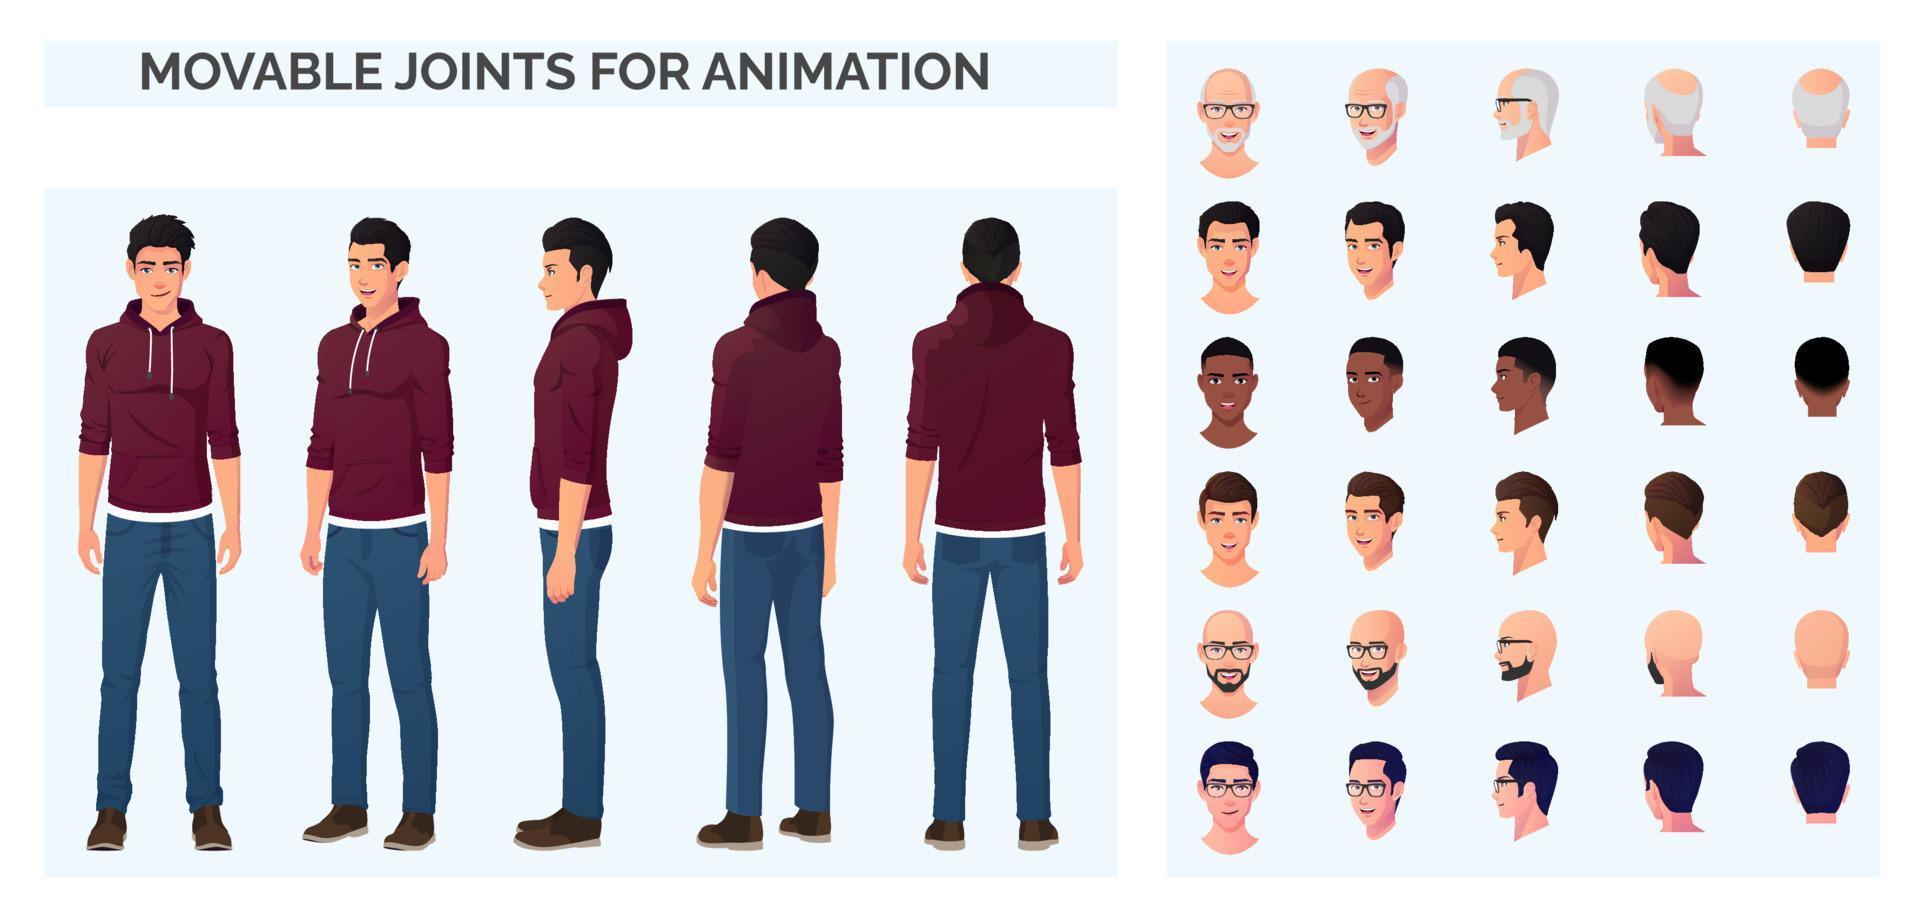 Casual Man Character Constructor for Animation, Cartoon Man Wearing Hoodie and Blue Jeans Character Creation with Front Side and Back View vector